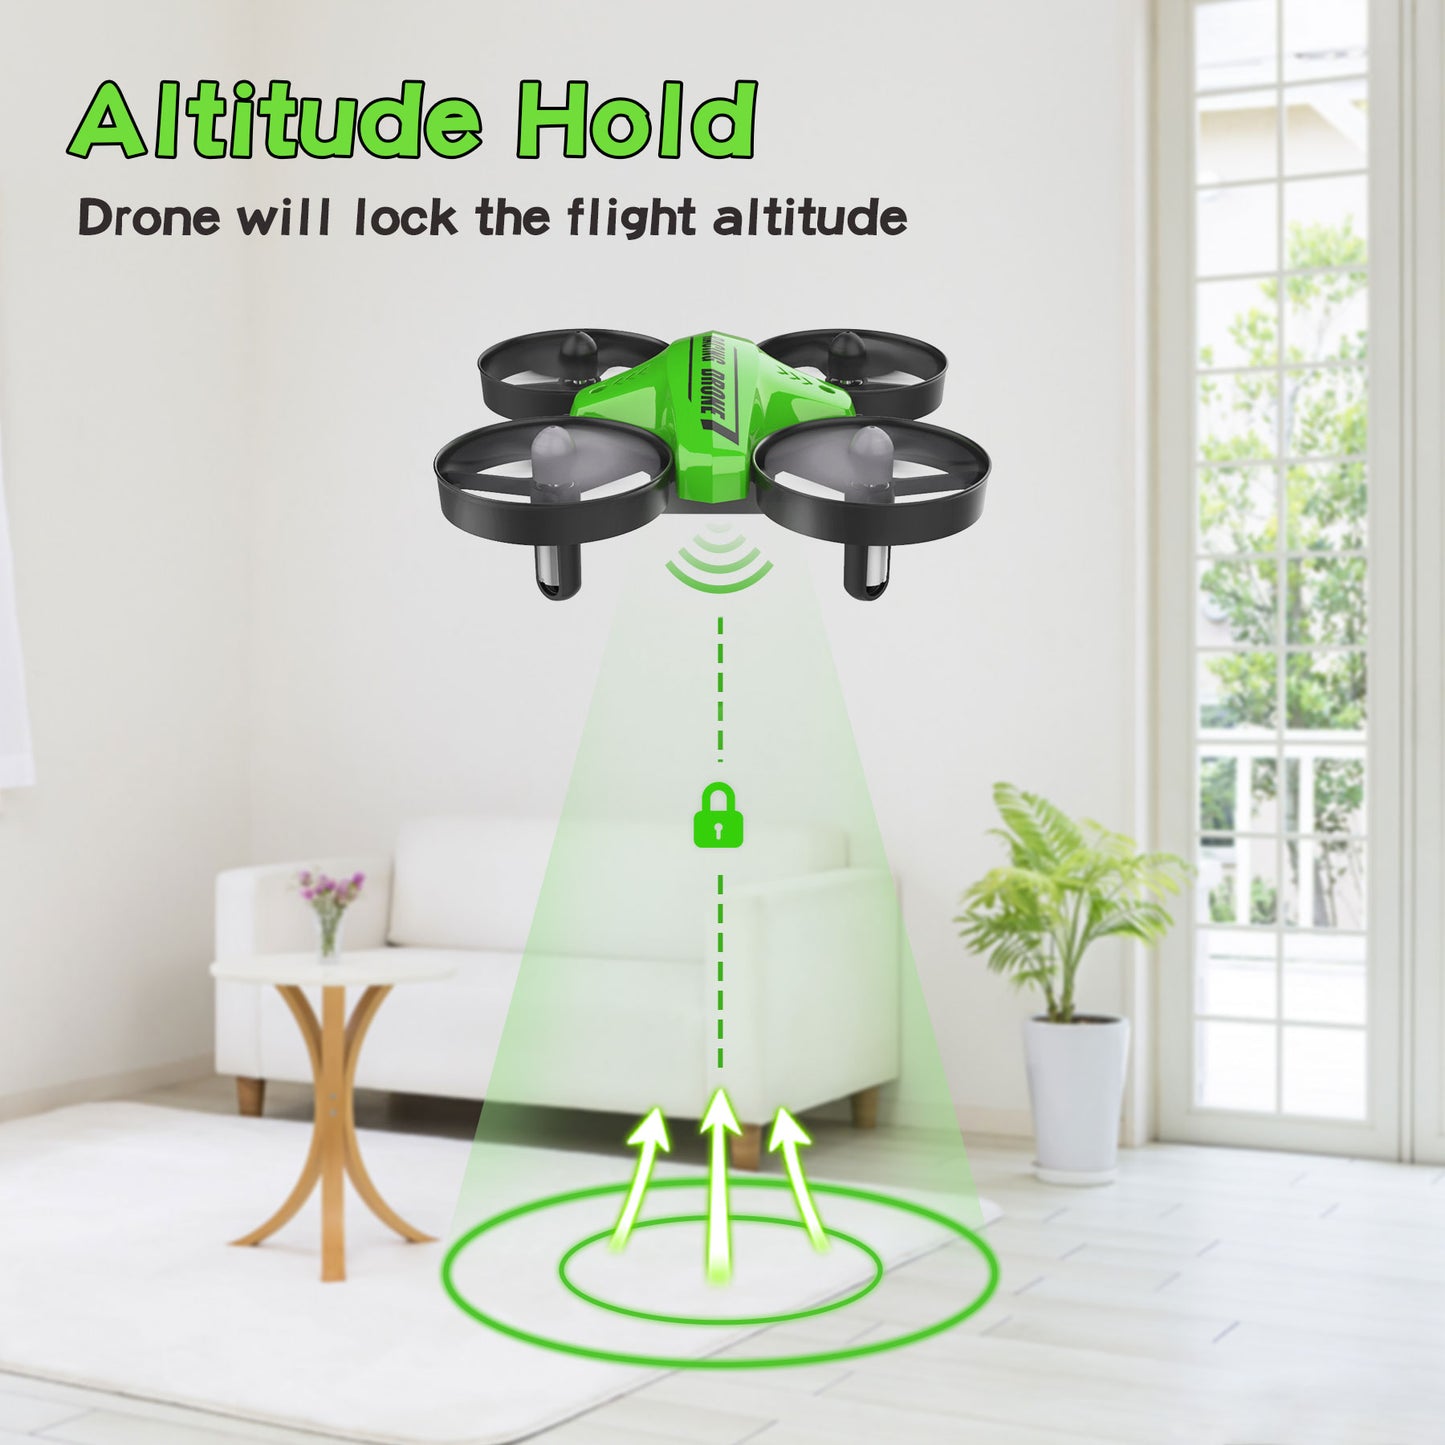 Children's mini drone toy for beginners